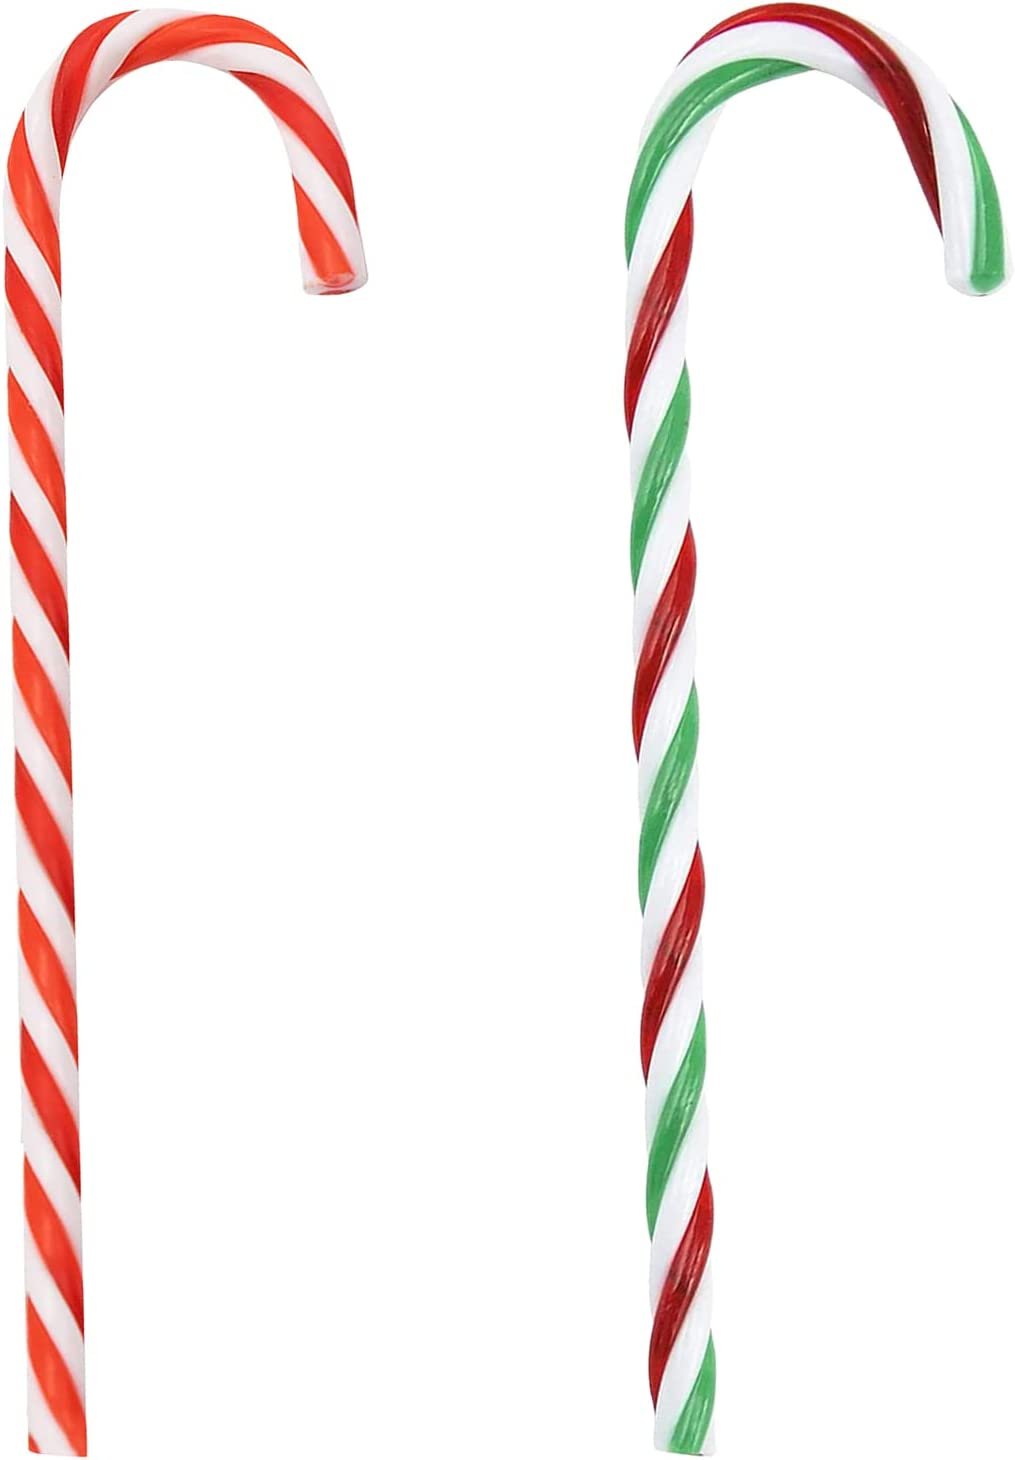 STERUN Strong Plastic 30 Cm Candy Cane Ornament Ideal For Decoration Christmas Tree, Home & Office Indoor, Outdoor Pack Of 2 | Candy Cane Decorations | Candy Cane Ornaments | Plastic Cane